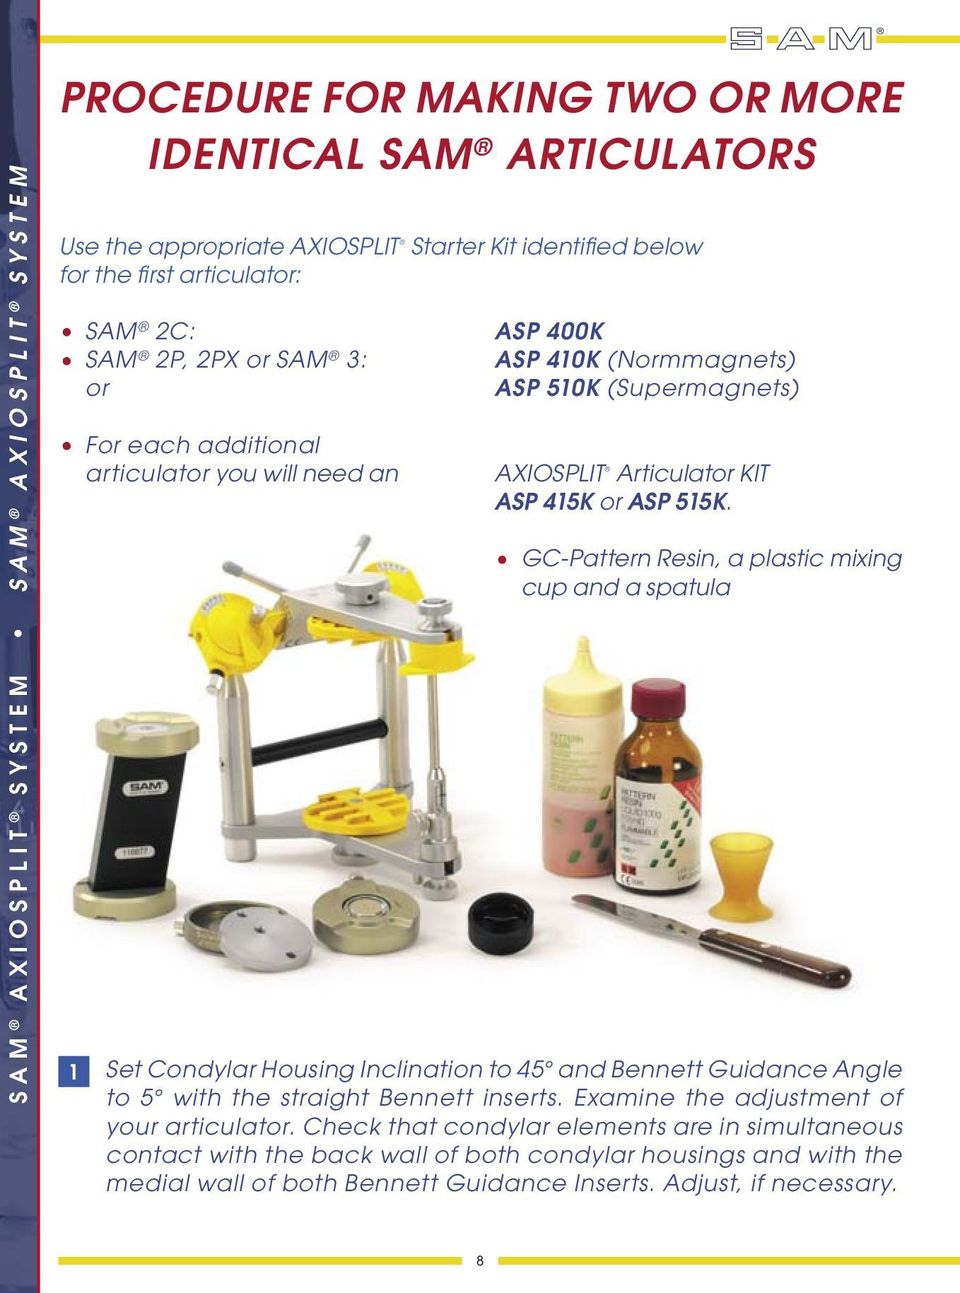 GC-Pattern Resin, a plastic mixing cup and a spatula 1 Set Condylar Housing Inclination to 45 and Bennett Guidance An gle to 5 with the straight Bennett inserts.